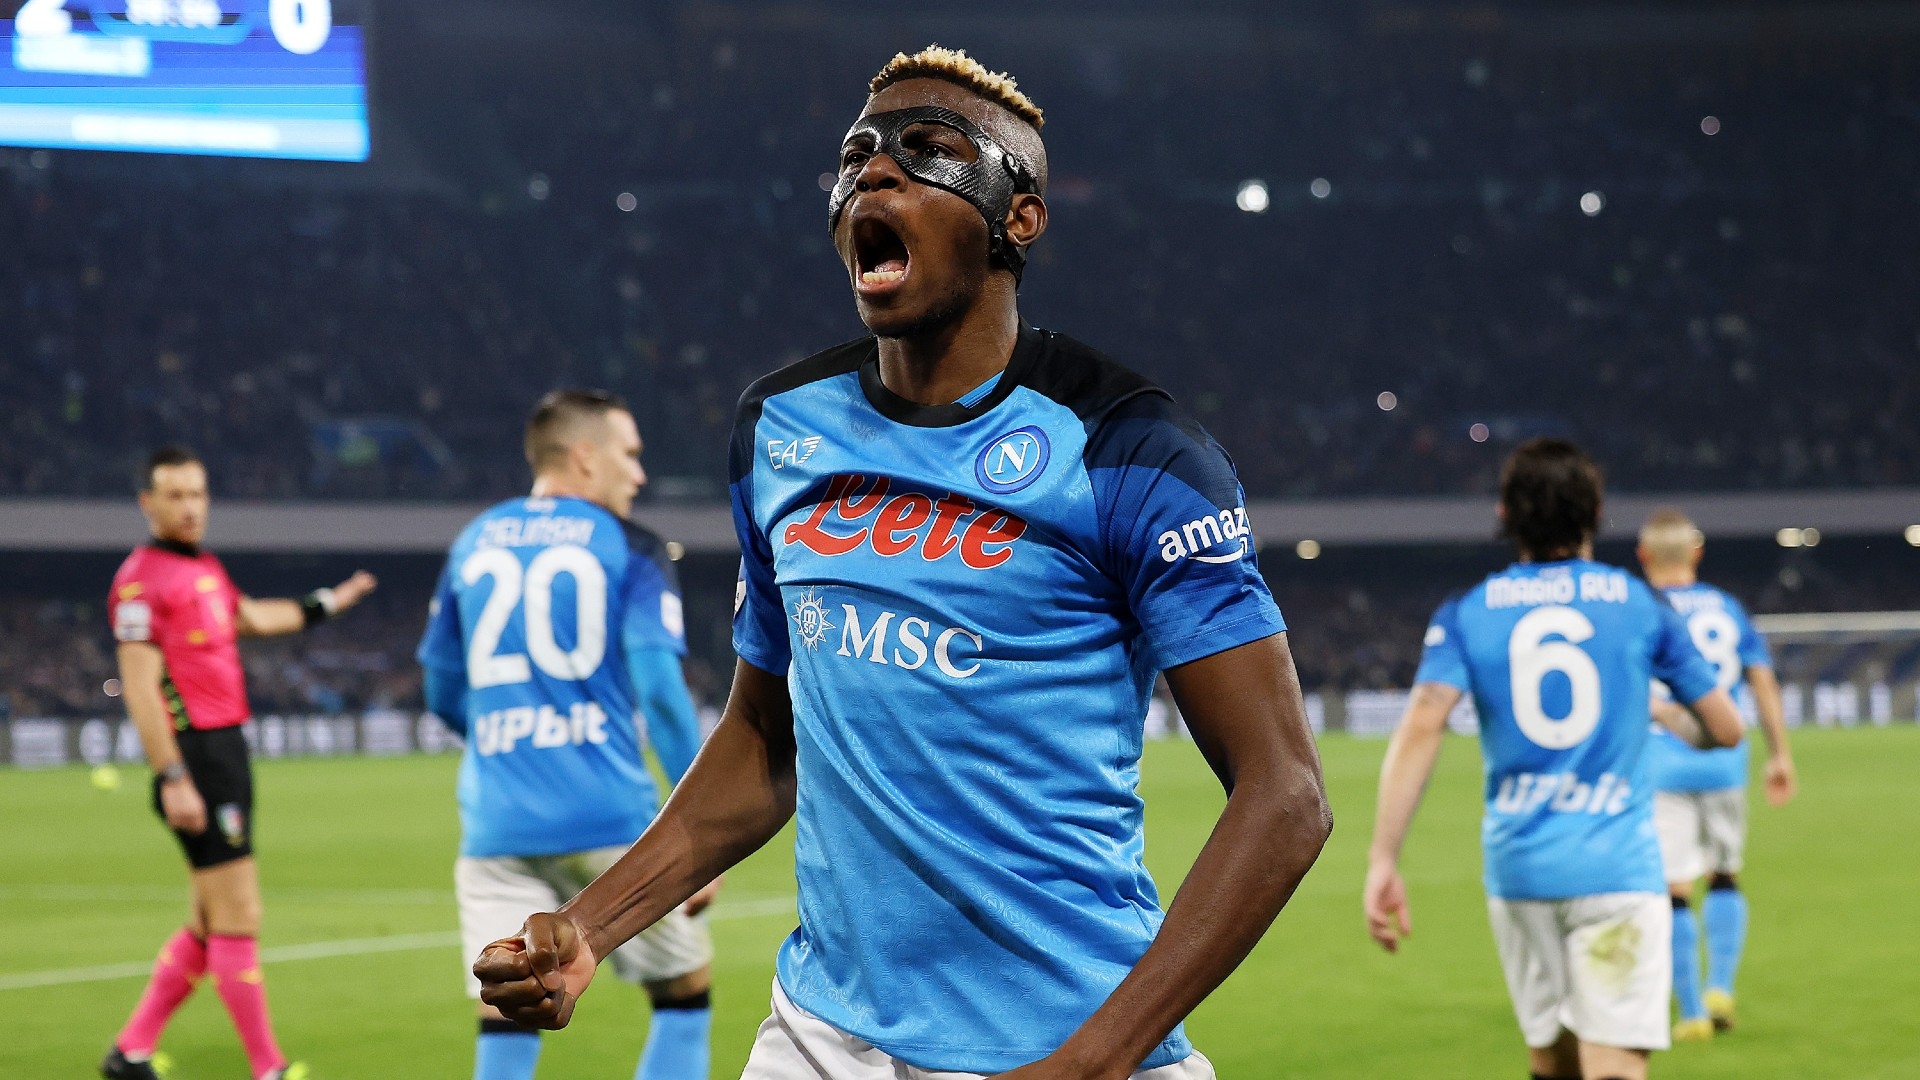 After crushing Juventus 5-1 on Friday and extending their lead over second-place Juventus by ten points, Napoli's hopes of capturing their first Serie A championship since Diego Maradona's time seem more realistic than ever.